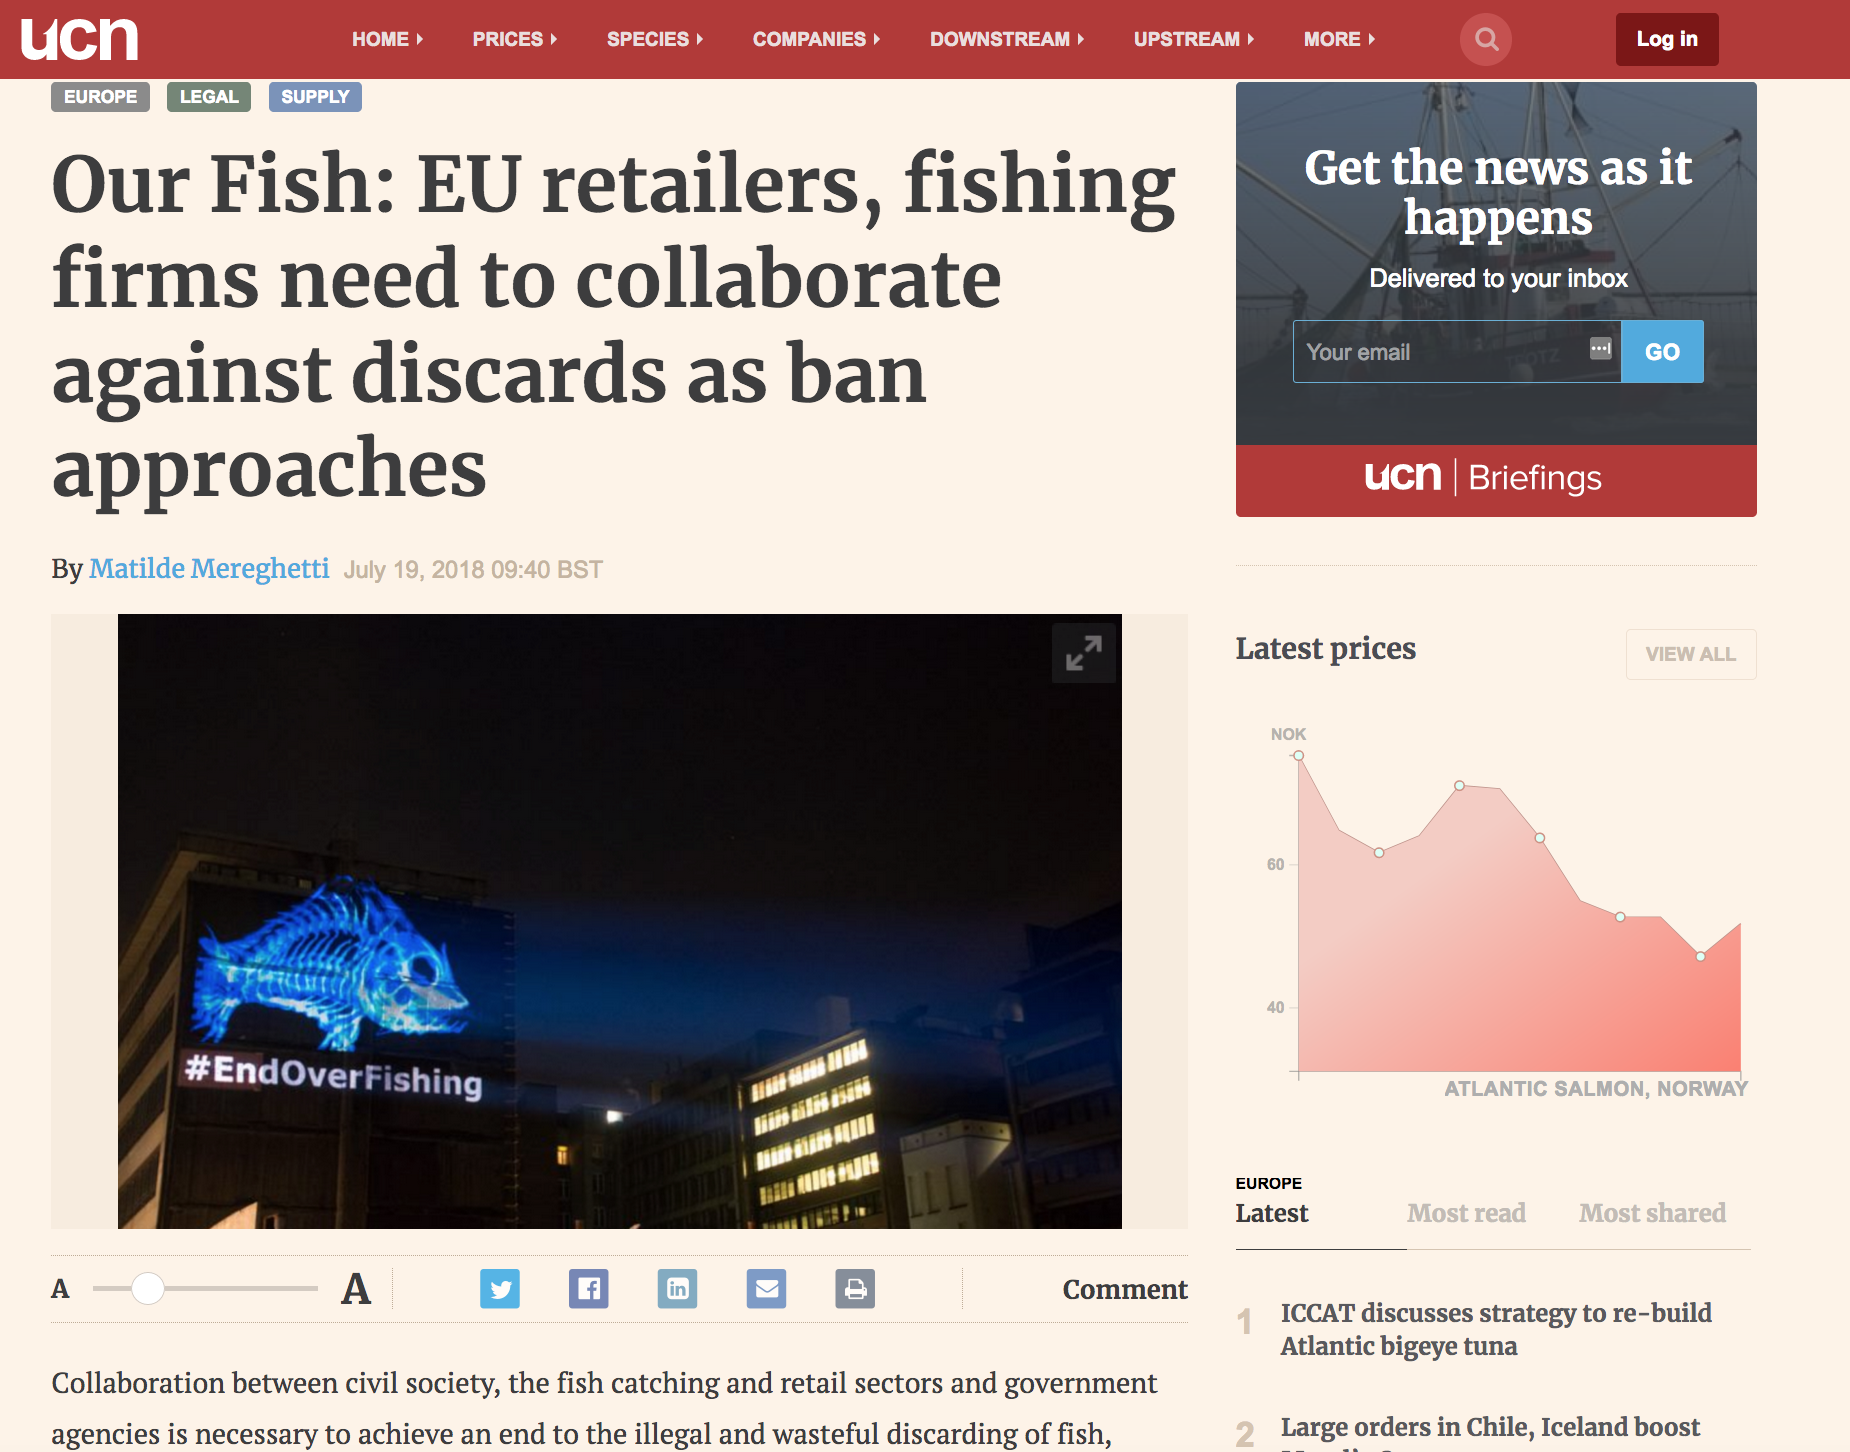 Our Fish: EU retailers, fishing firms need to collaborate against discards as ban approaches